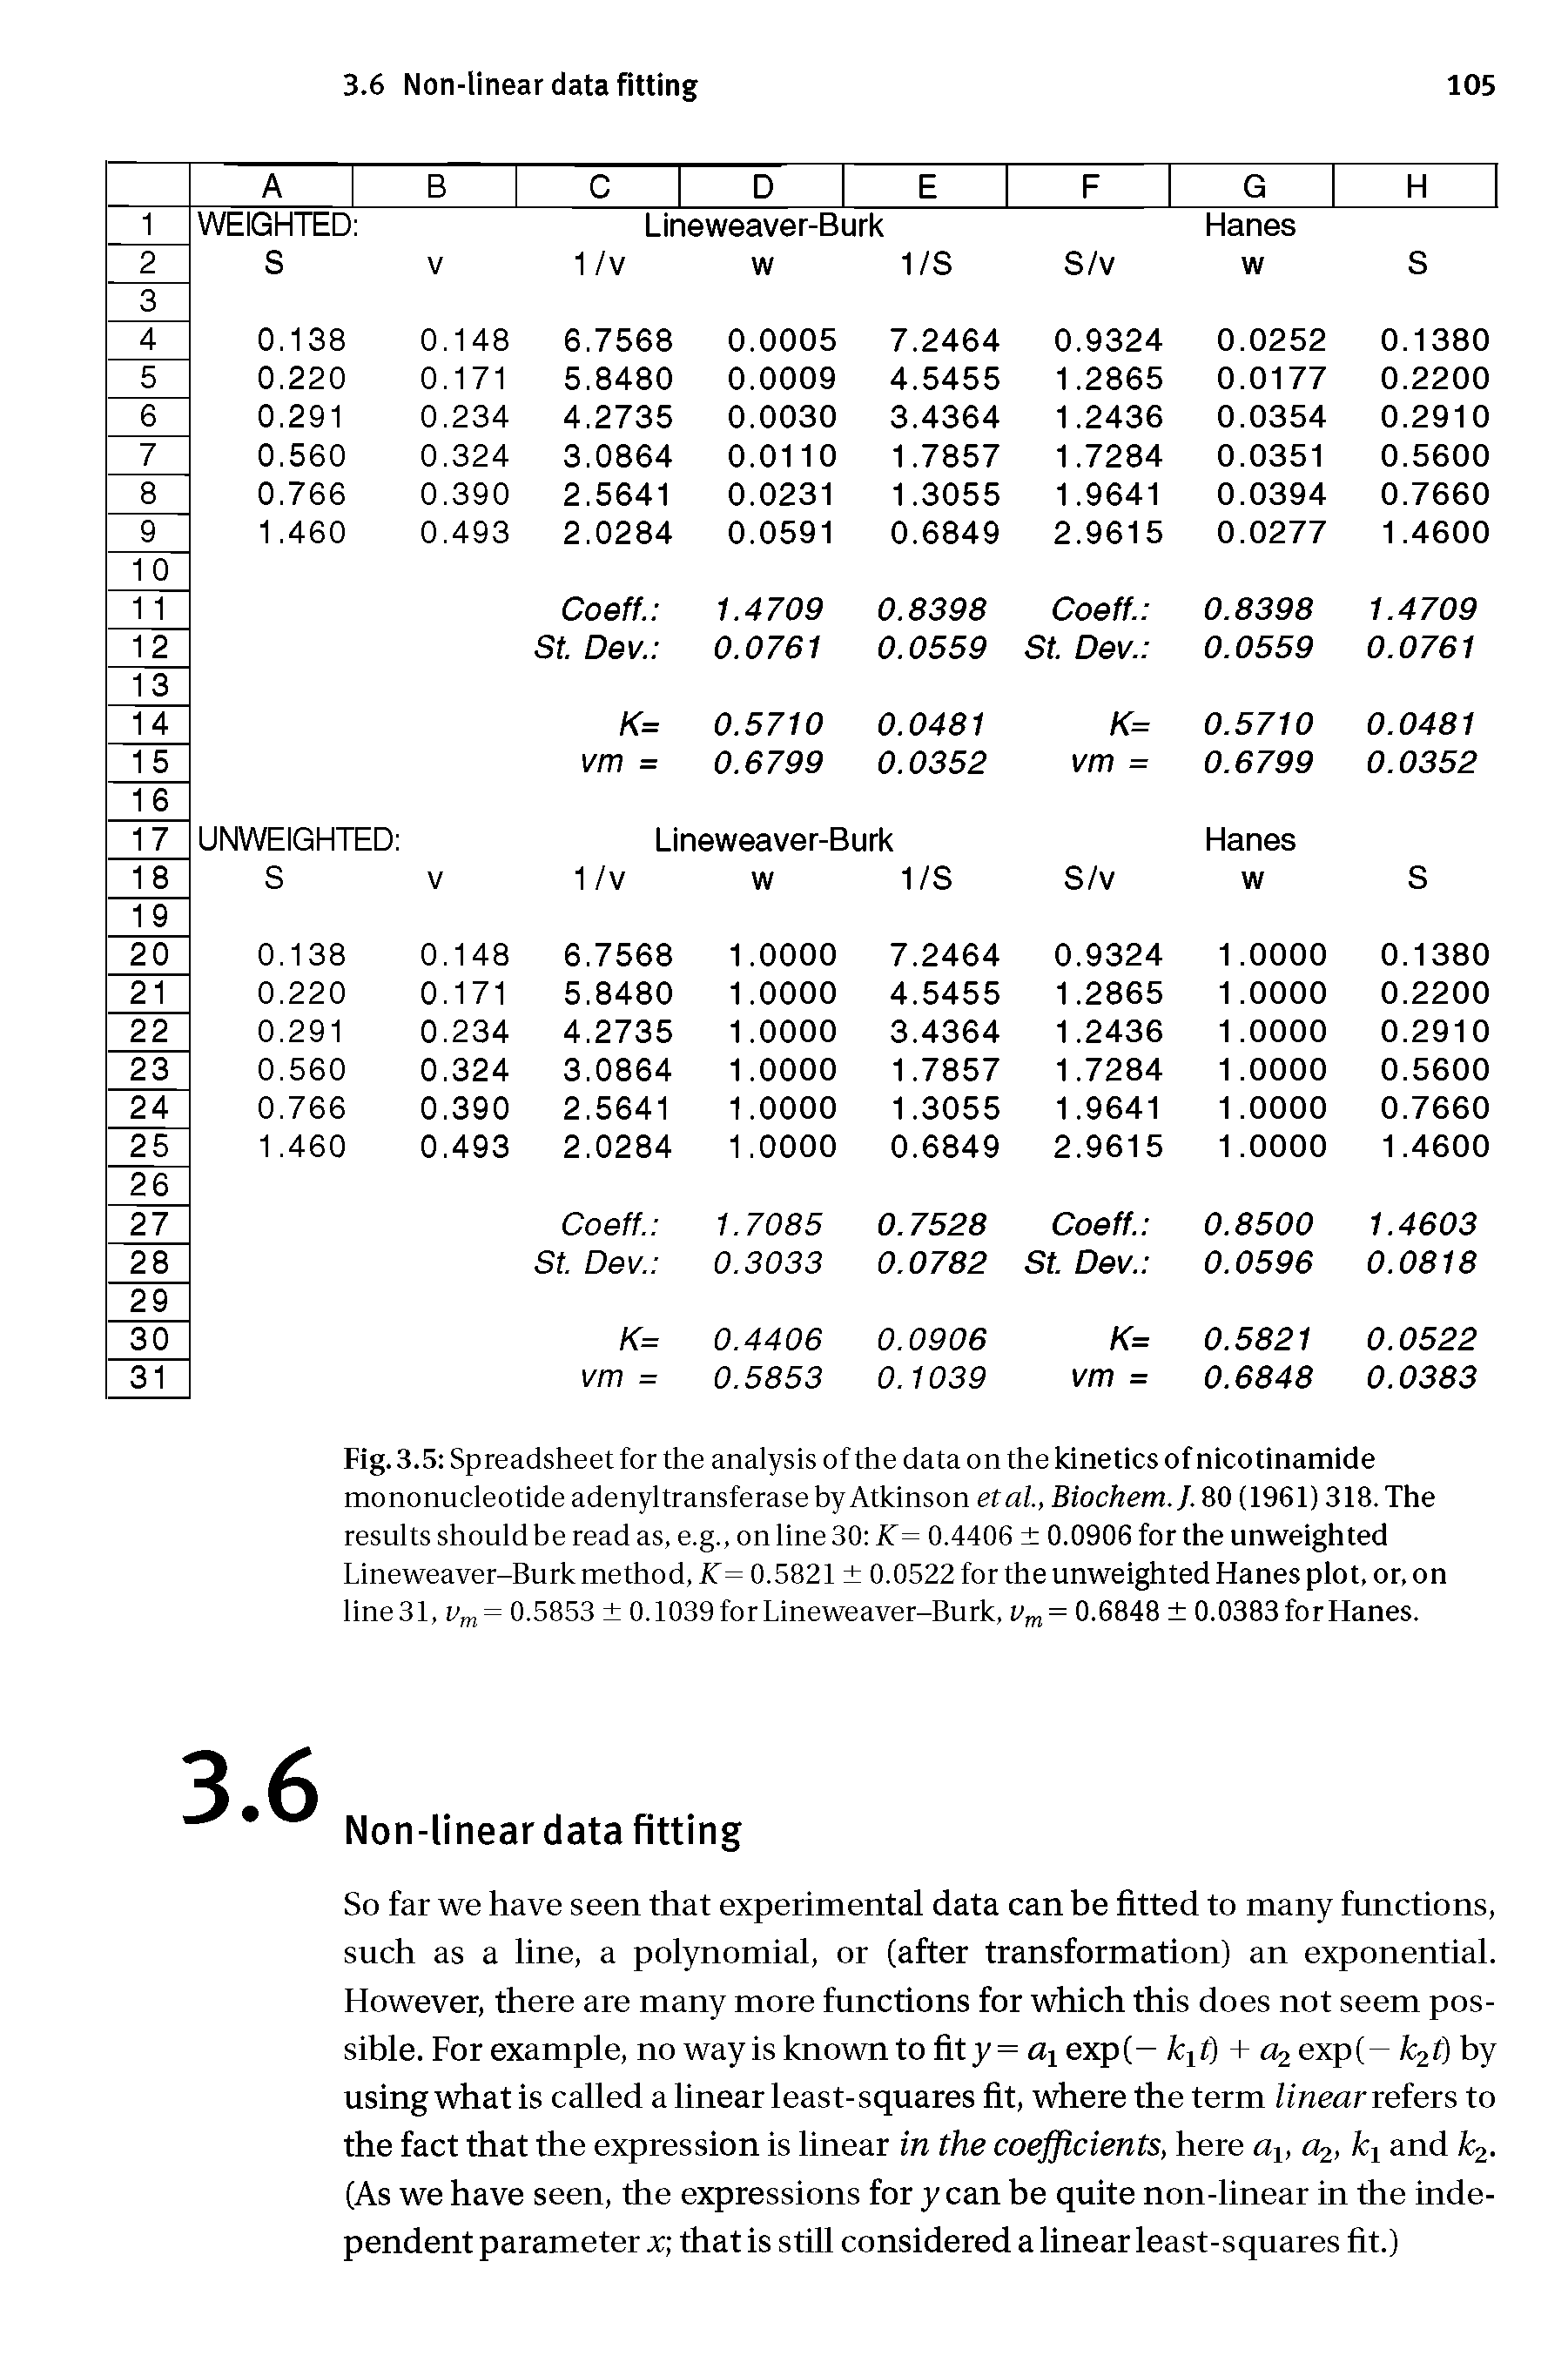 Fig. 3.5 Spreadsheet for the analysis of the data on the kinetics of nicotinamide mononucleotide adenyl transferase by Atkinson etal, Biochem.J. 80 (1961) 318. The results should be read as, e.g., on line 30 K = 0.4406 0.0906 for the unweighted Lineweaver-Burk method, K = 0.5821 0.0522 for the unweighted Hanes plot, or, on line31, vm = 0.5853 0.1039 for Lineweaver-Burk, vm= 0.6848 0.0383 forHanes.